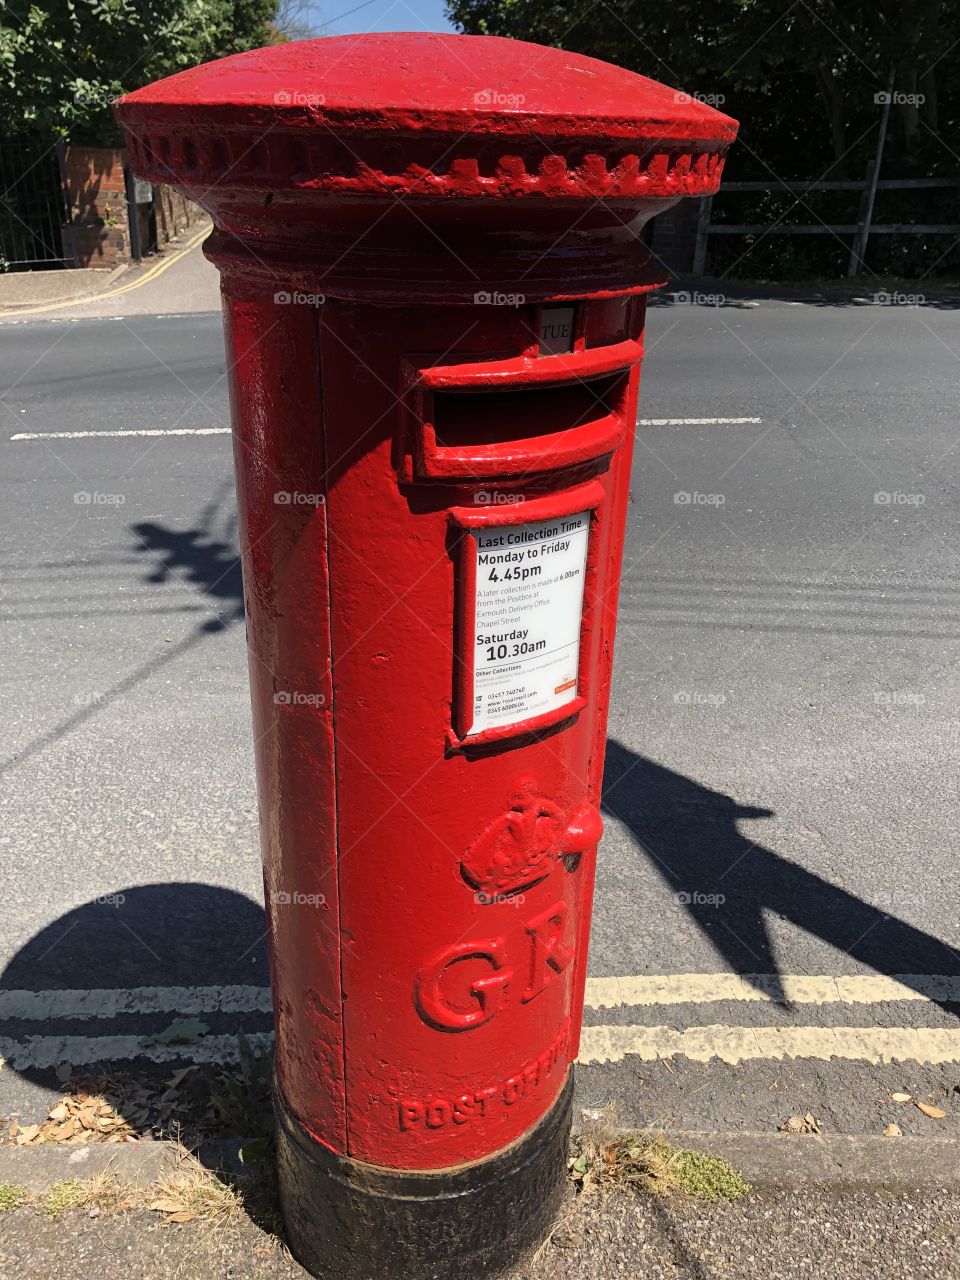 Today l am in Budleigh Salterton and snapping another bright red UK post box, l love collecting them.